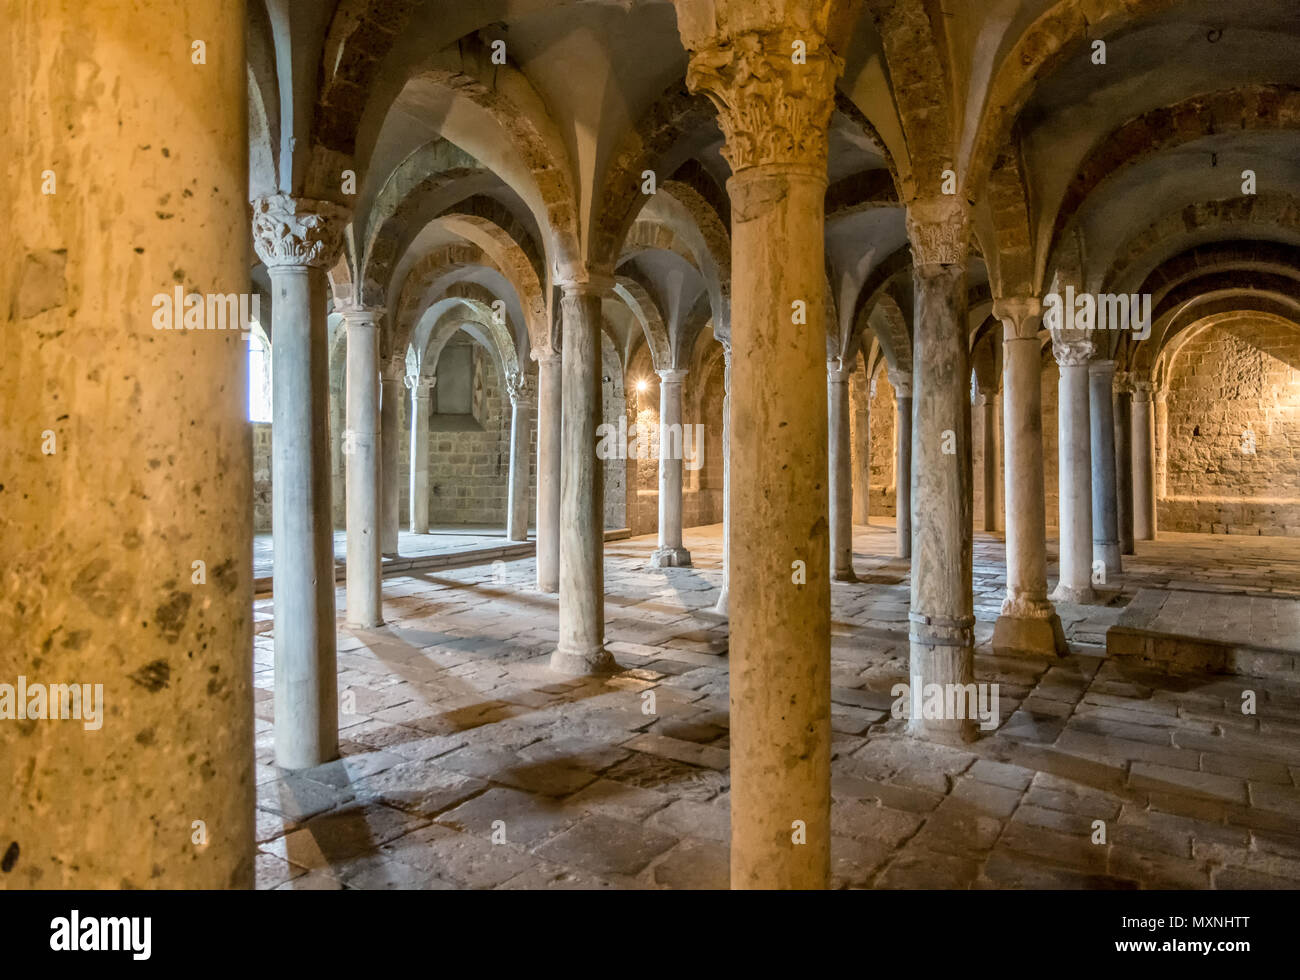 Crypt With A Vaulted Ceiling And Lots Of Columns Basilica Of San Pietro Tuscania Viterbo Lazio Italy So Stock Photo Alamy